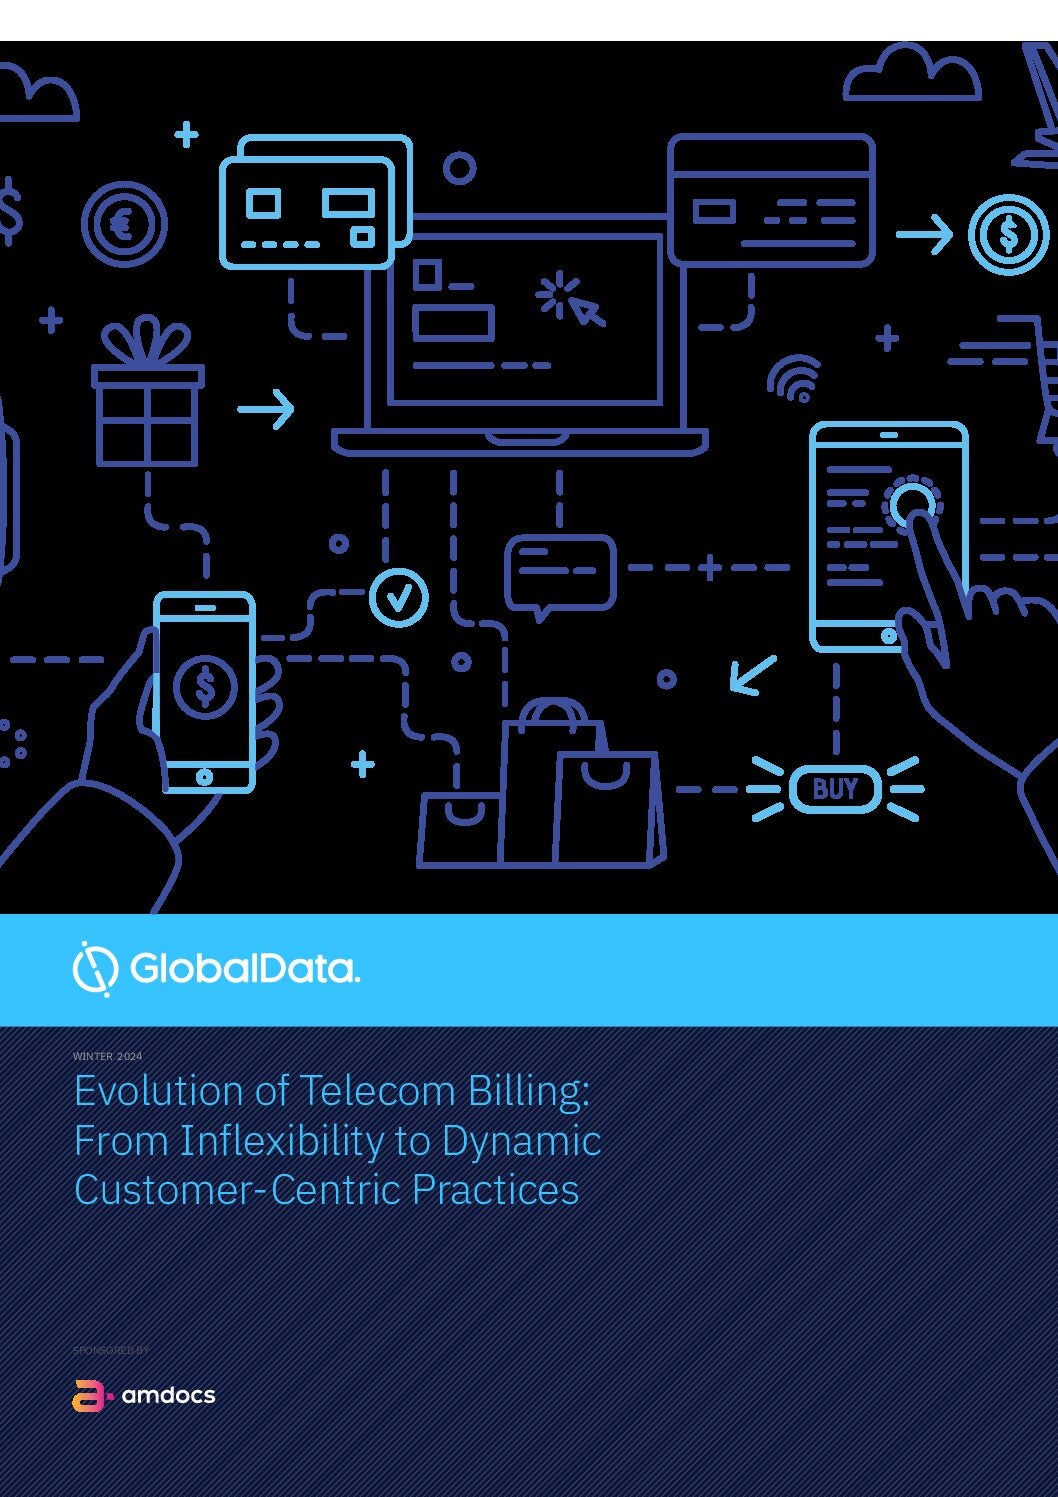 Evolution of Telecom Billing: From Inflexibility to Dynamic Customer-Centric Practices